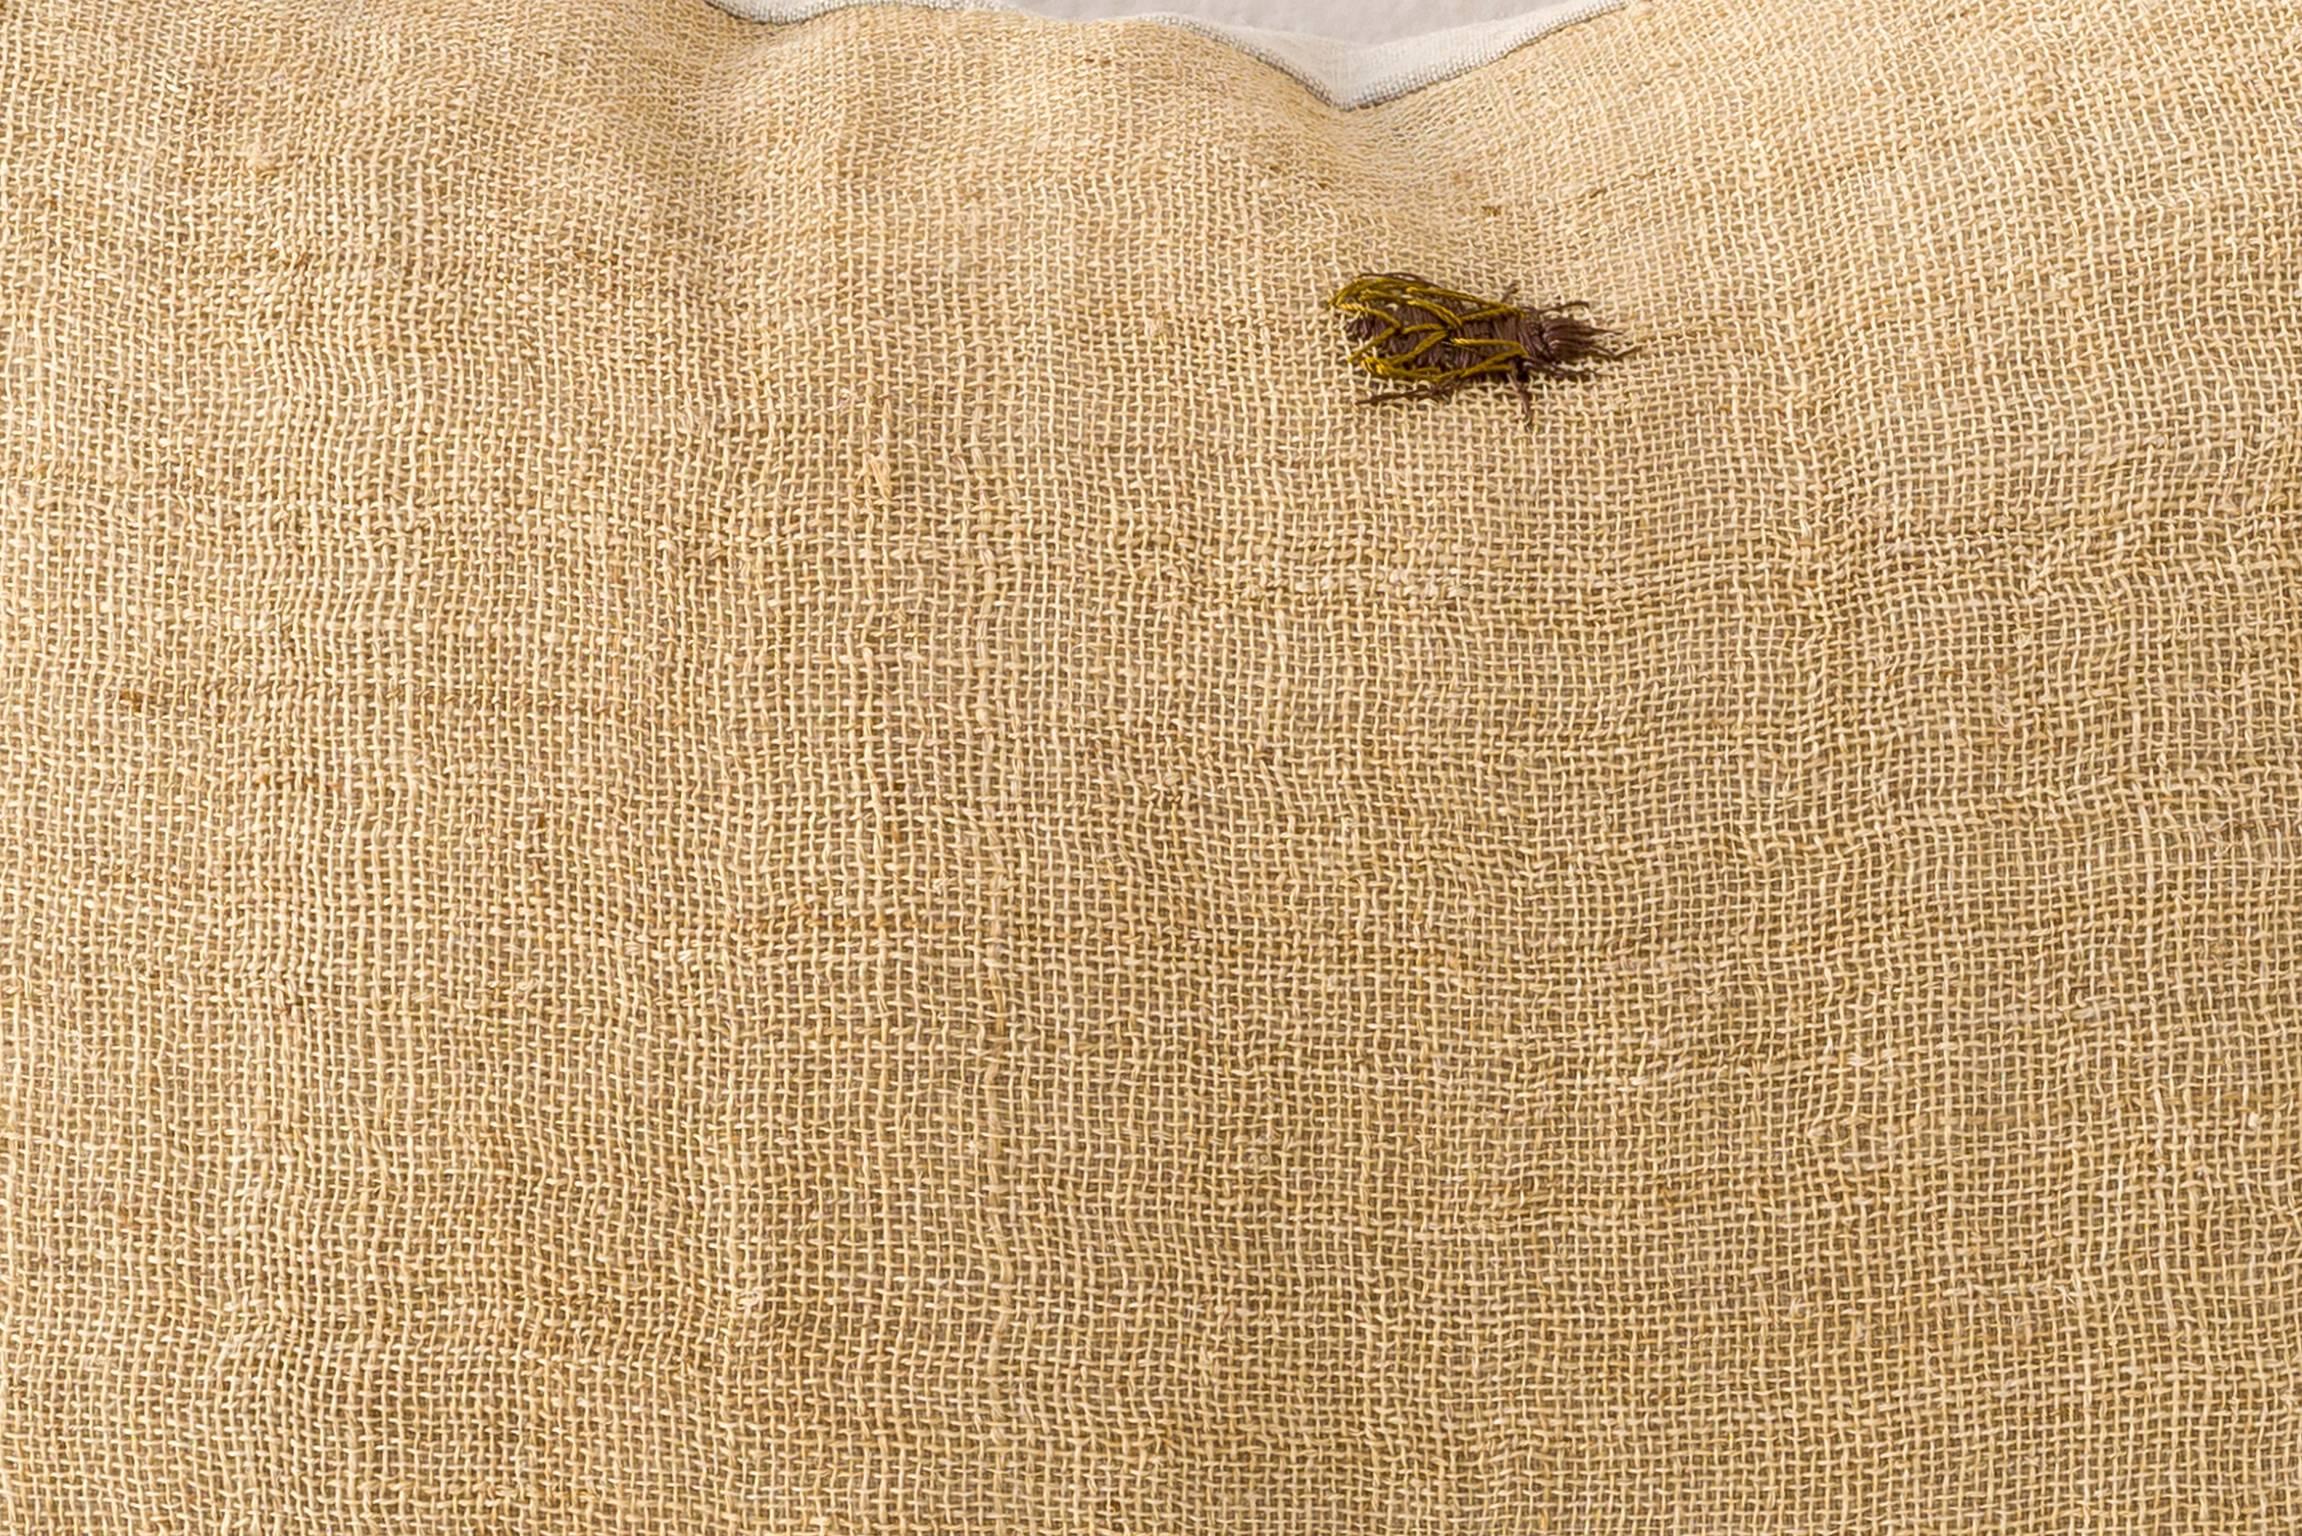 American Finely Embroidered Bee Cushions -- Silk on Hemp  For Sale